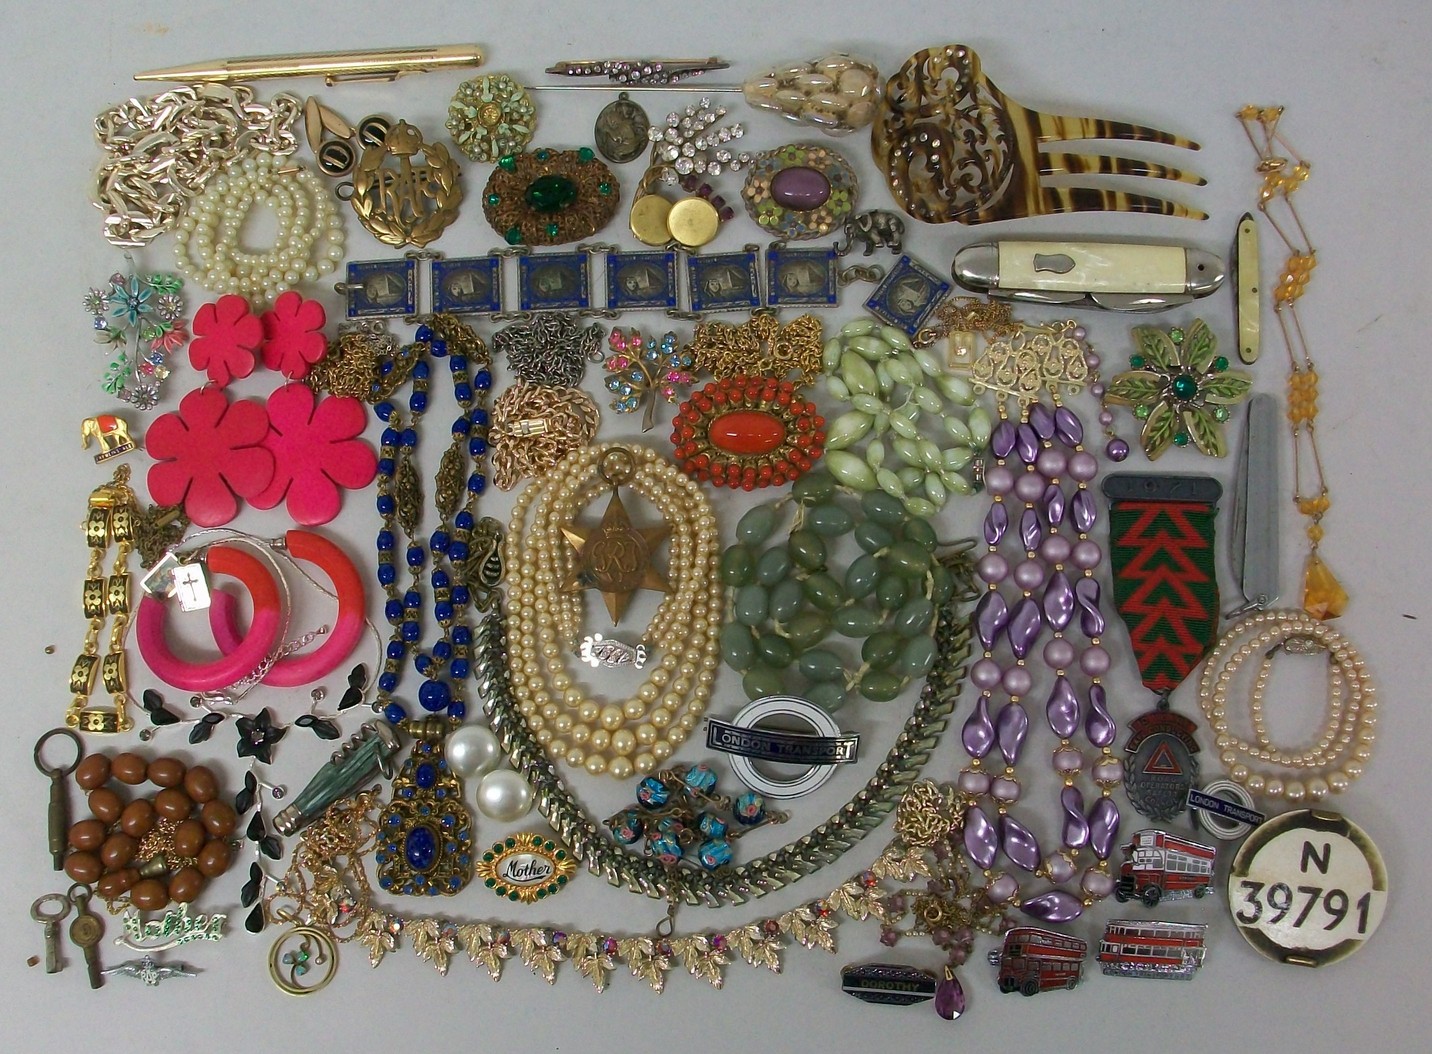 A quantity of costume jewellery including necklaces, earrings and brooches, together with an